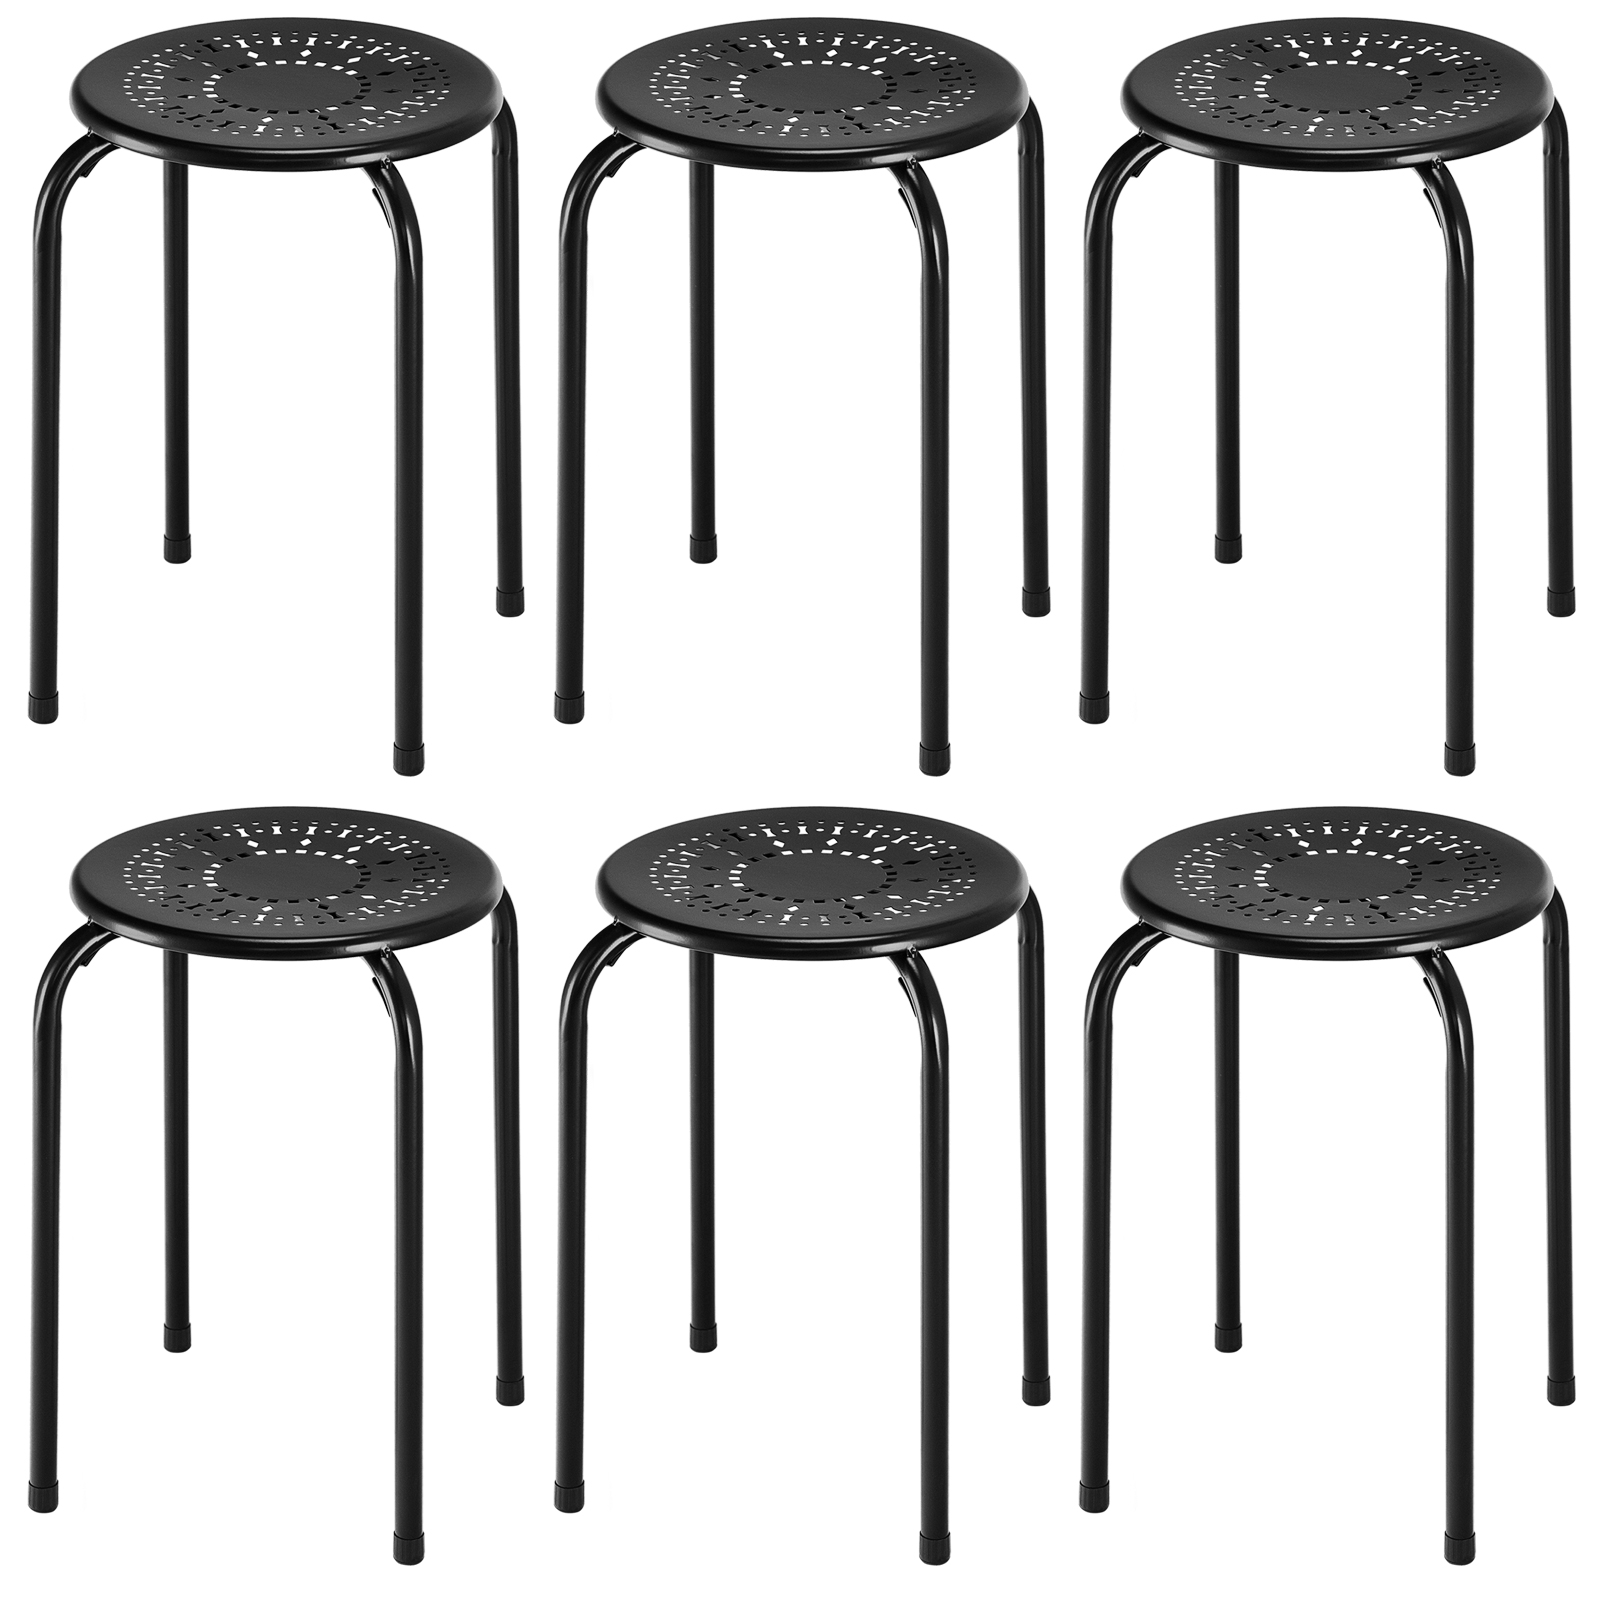 Set_of_6_Round_Metal_Stools_Support_up_to_120kg_Black-8.jpg